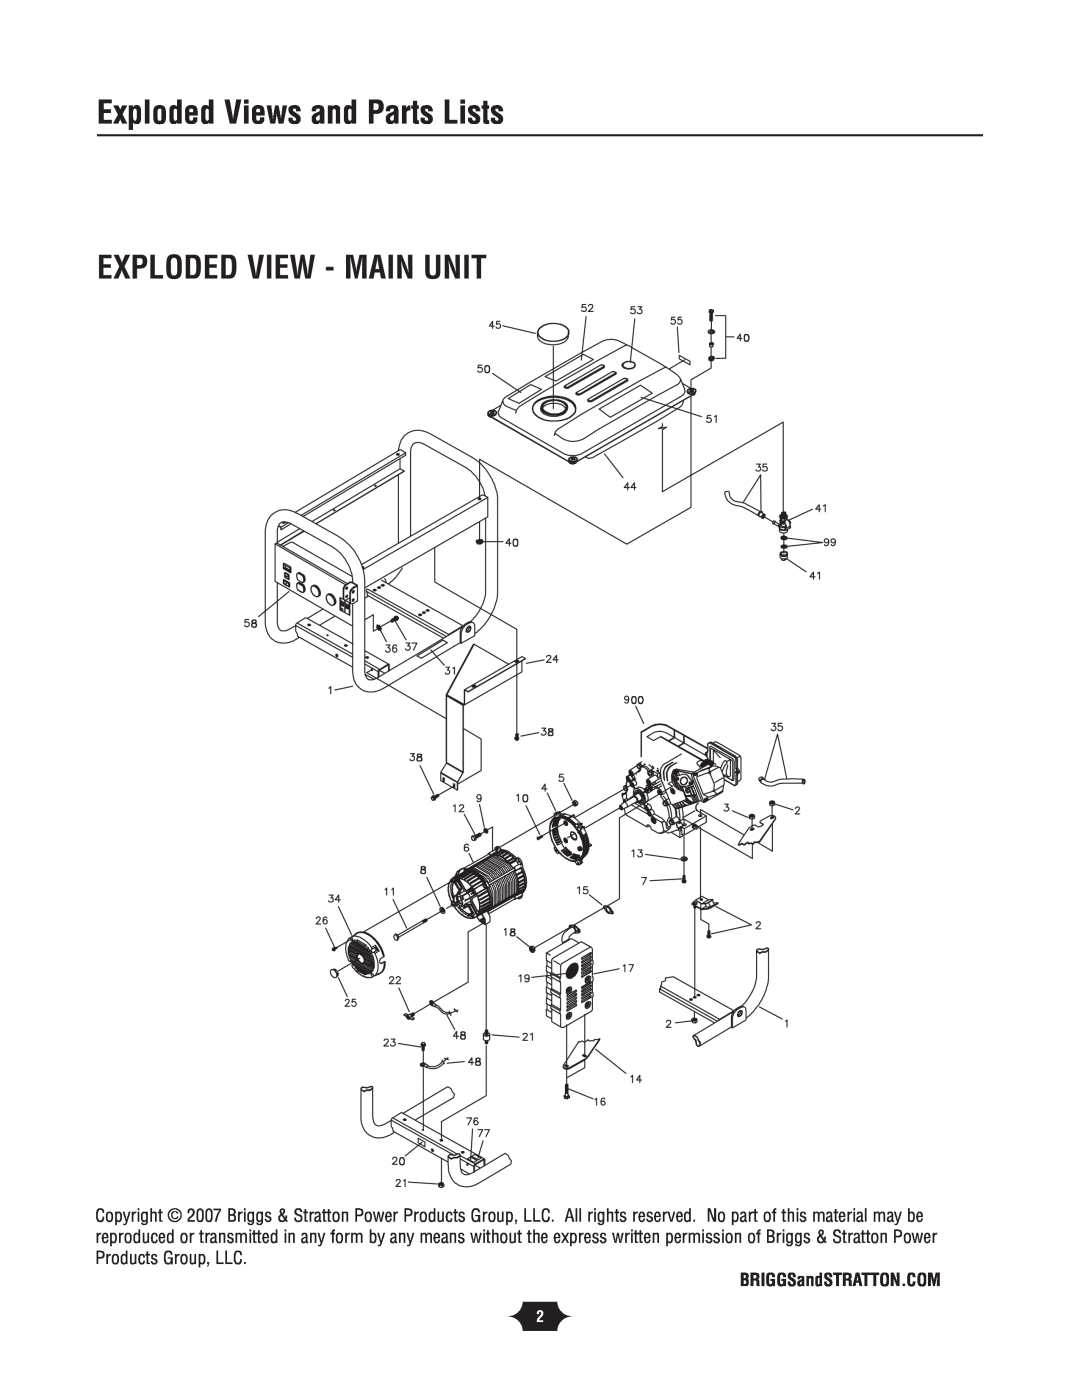 Briggs & Stratton 30342 manual Exploded Views and Parts Lists, Exploded View - Main Unit 